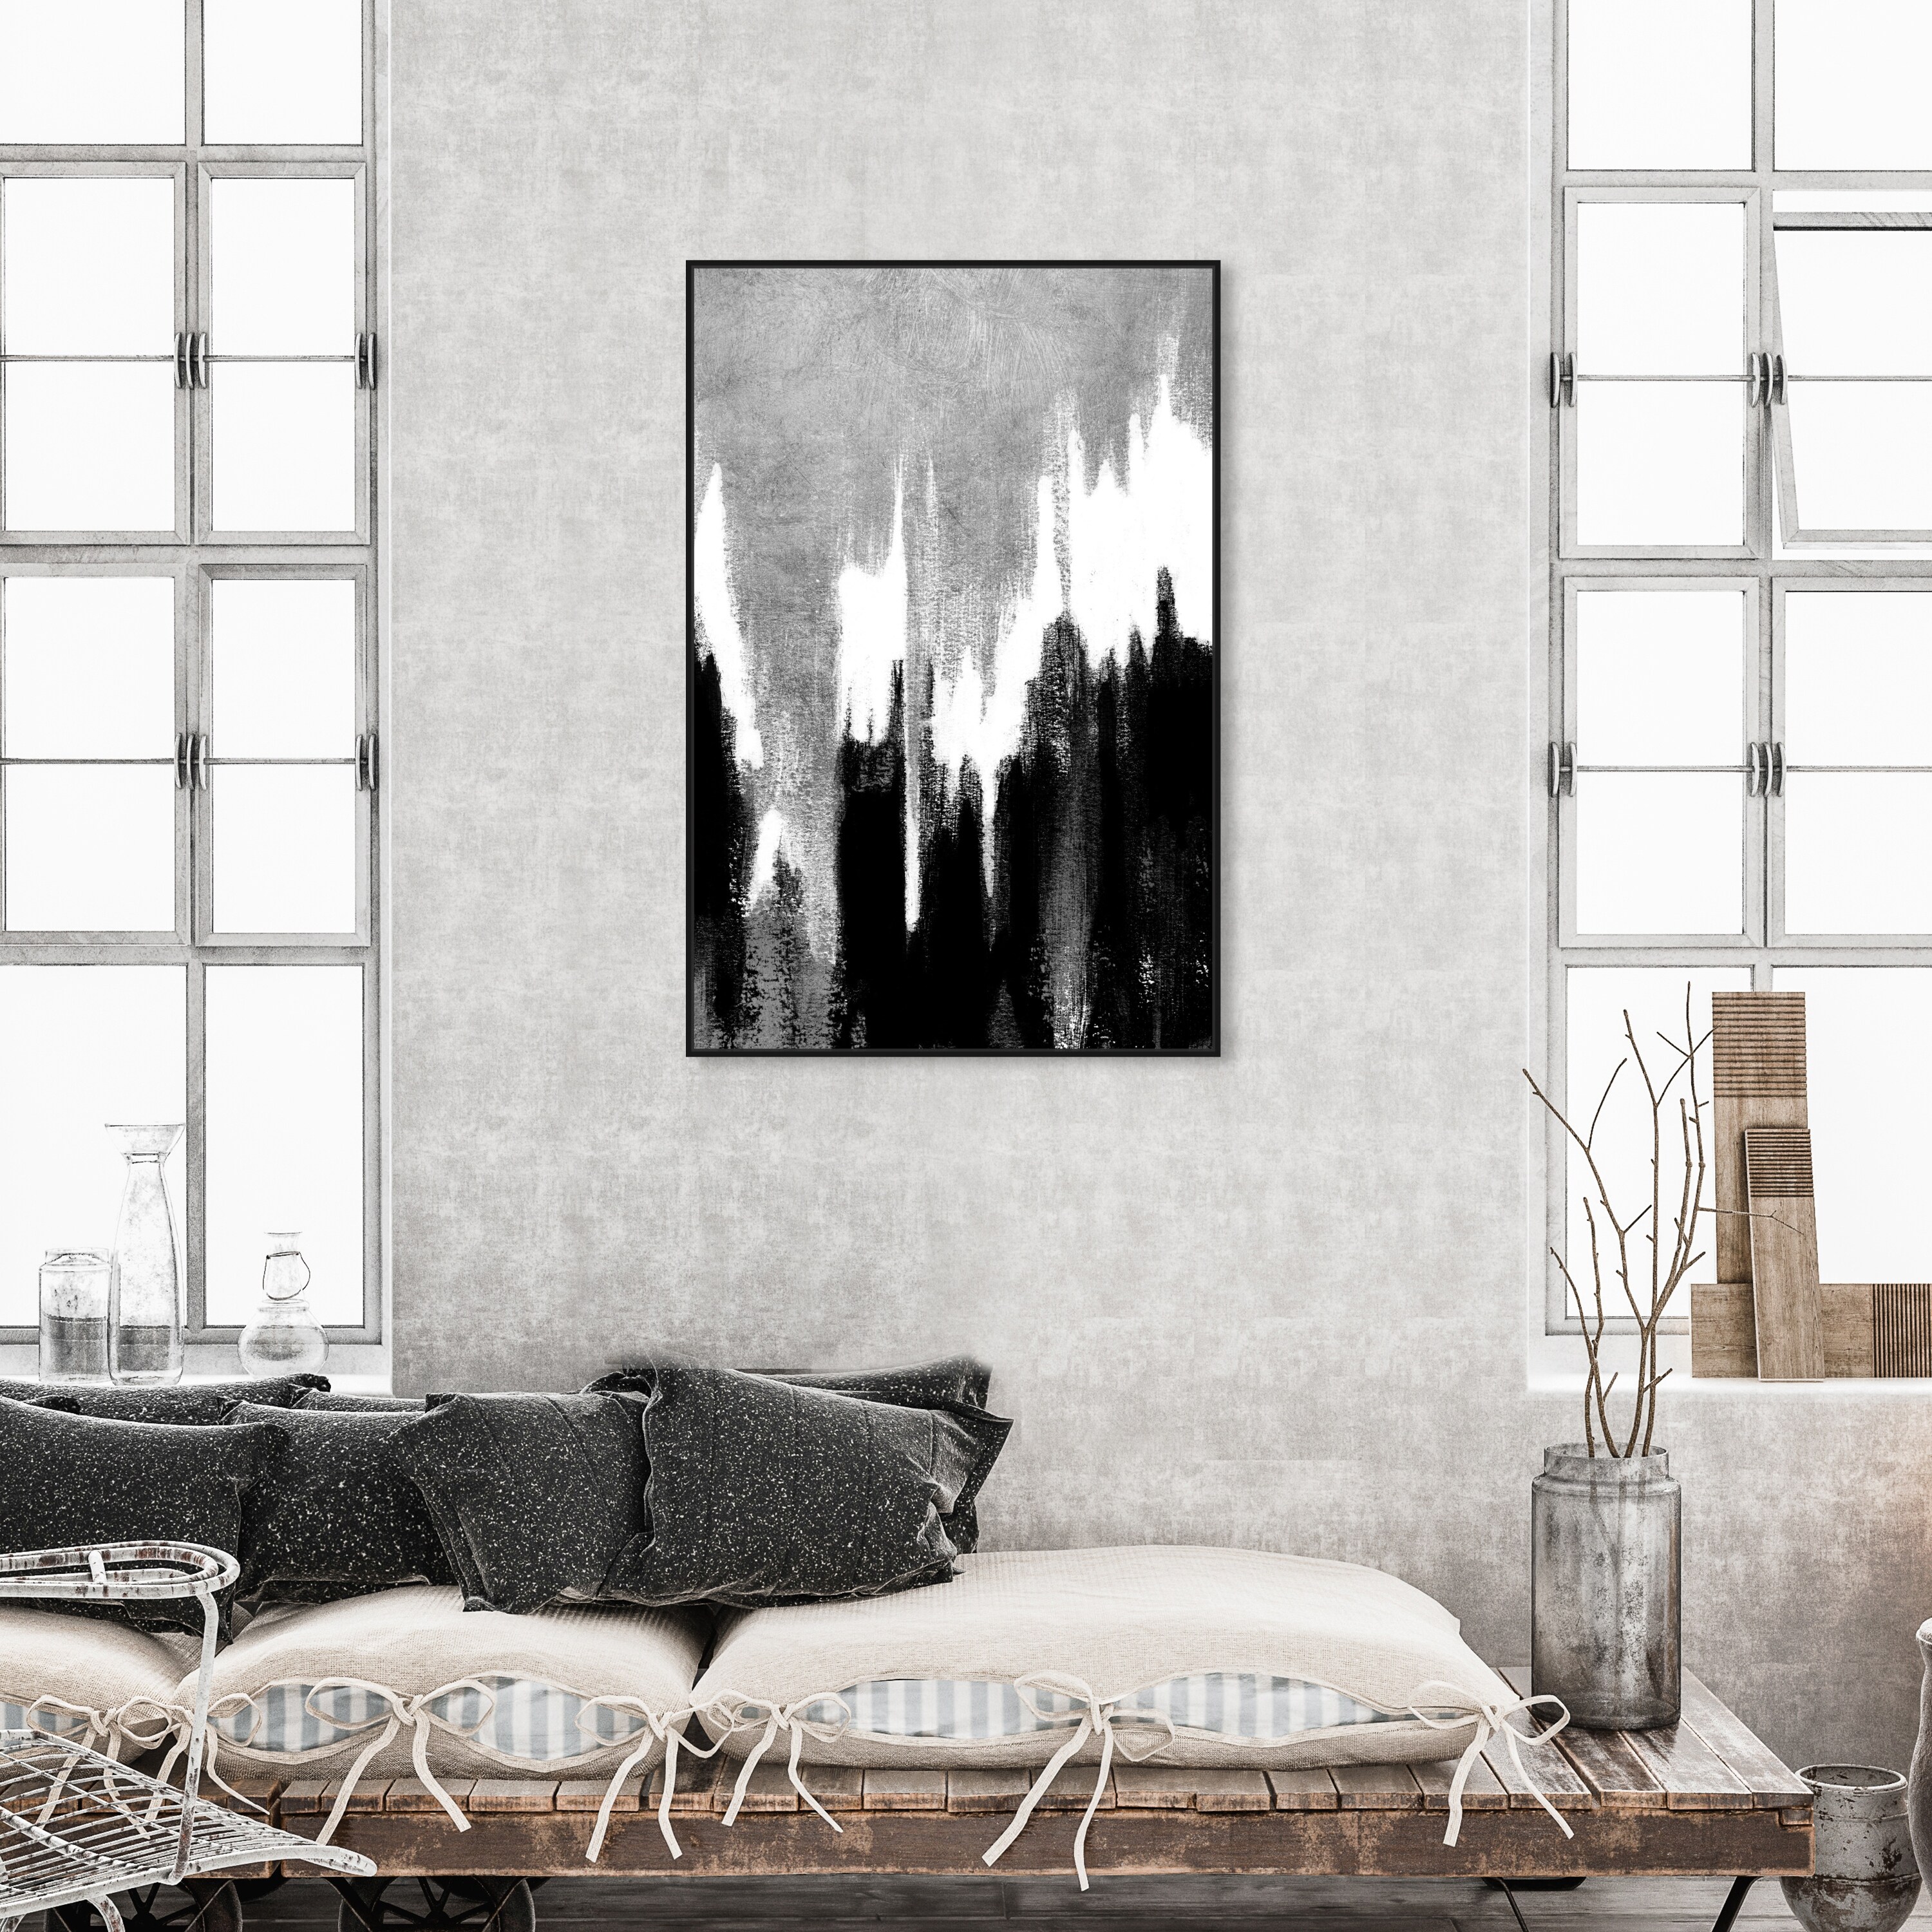 Oliver Gal 'Adore Adore Silver' Abstract Wall Art Framed Canvas Print Paint  Gray, Black On Sale Bed Bath  Beyond 32481002